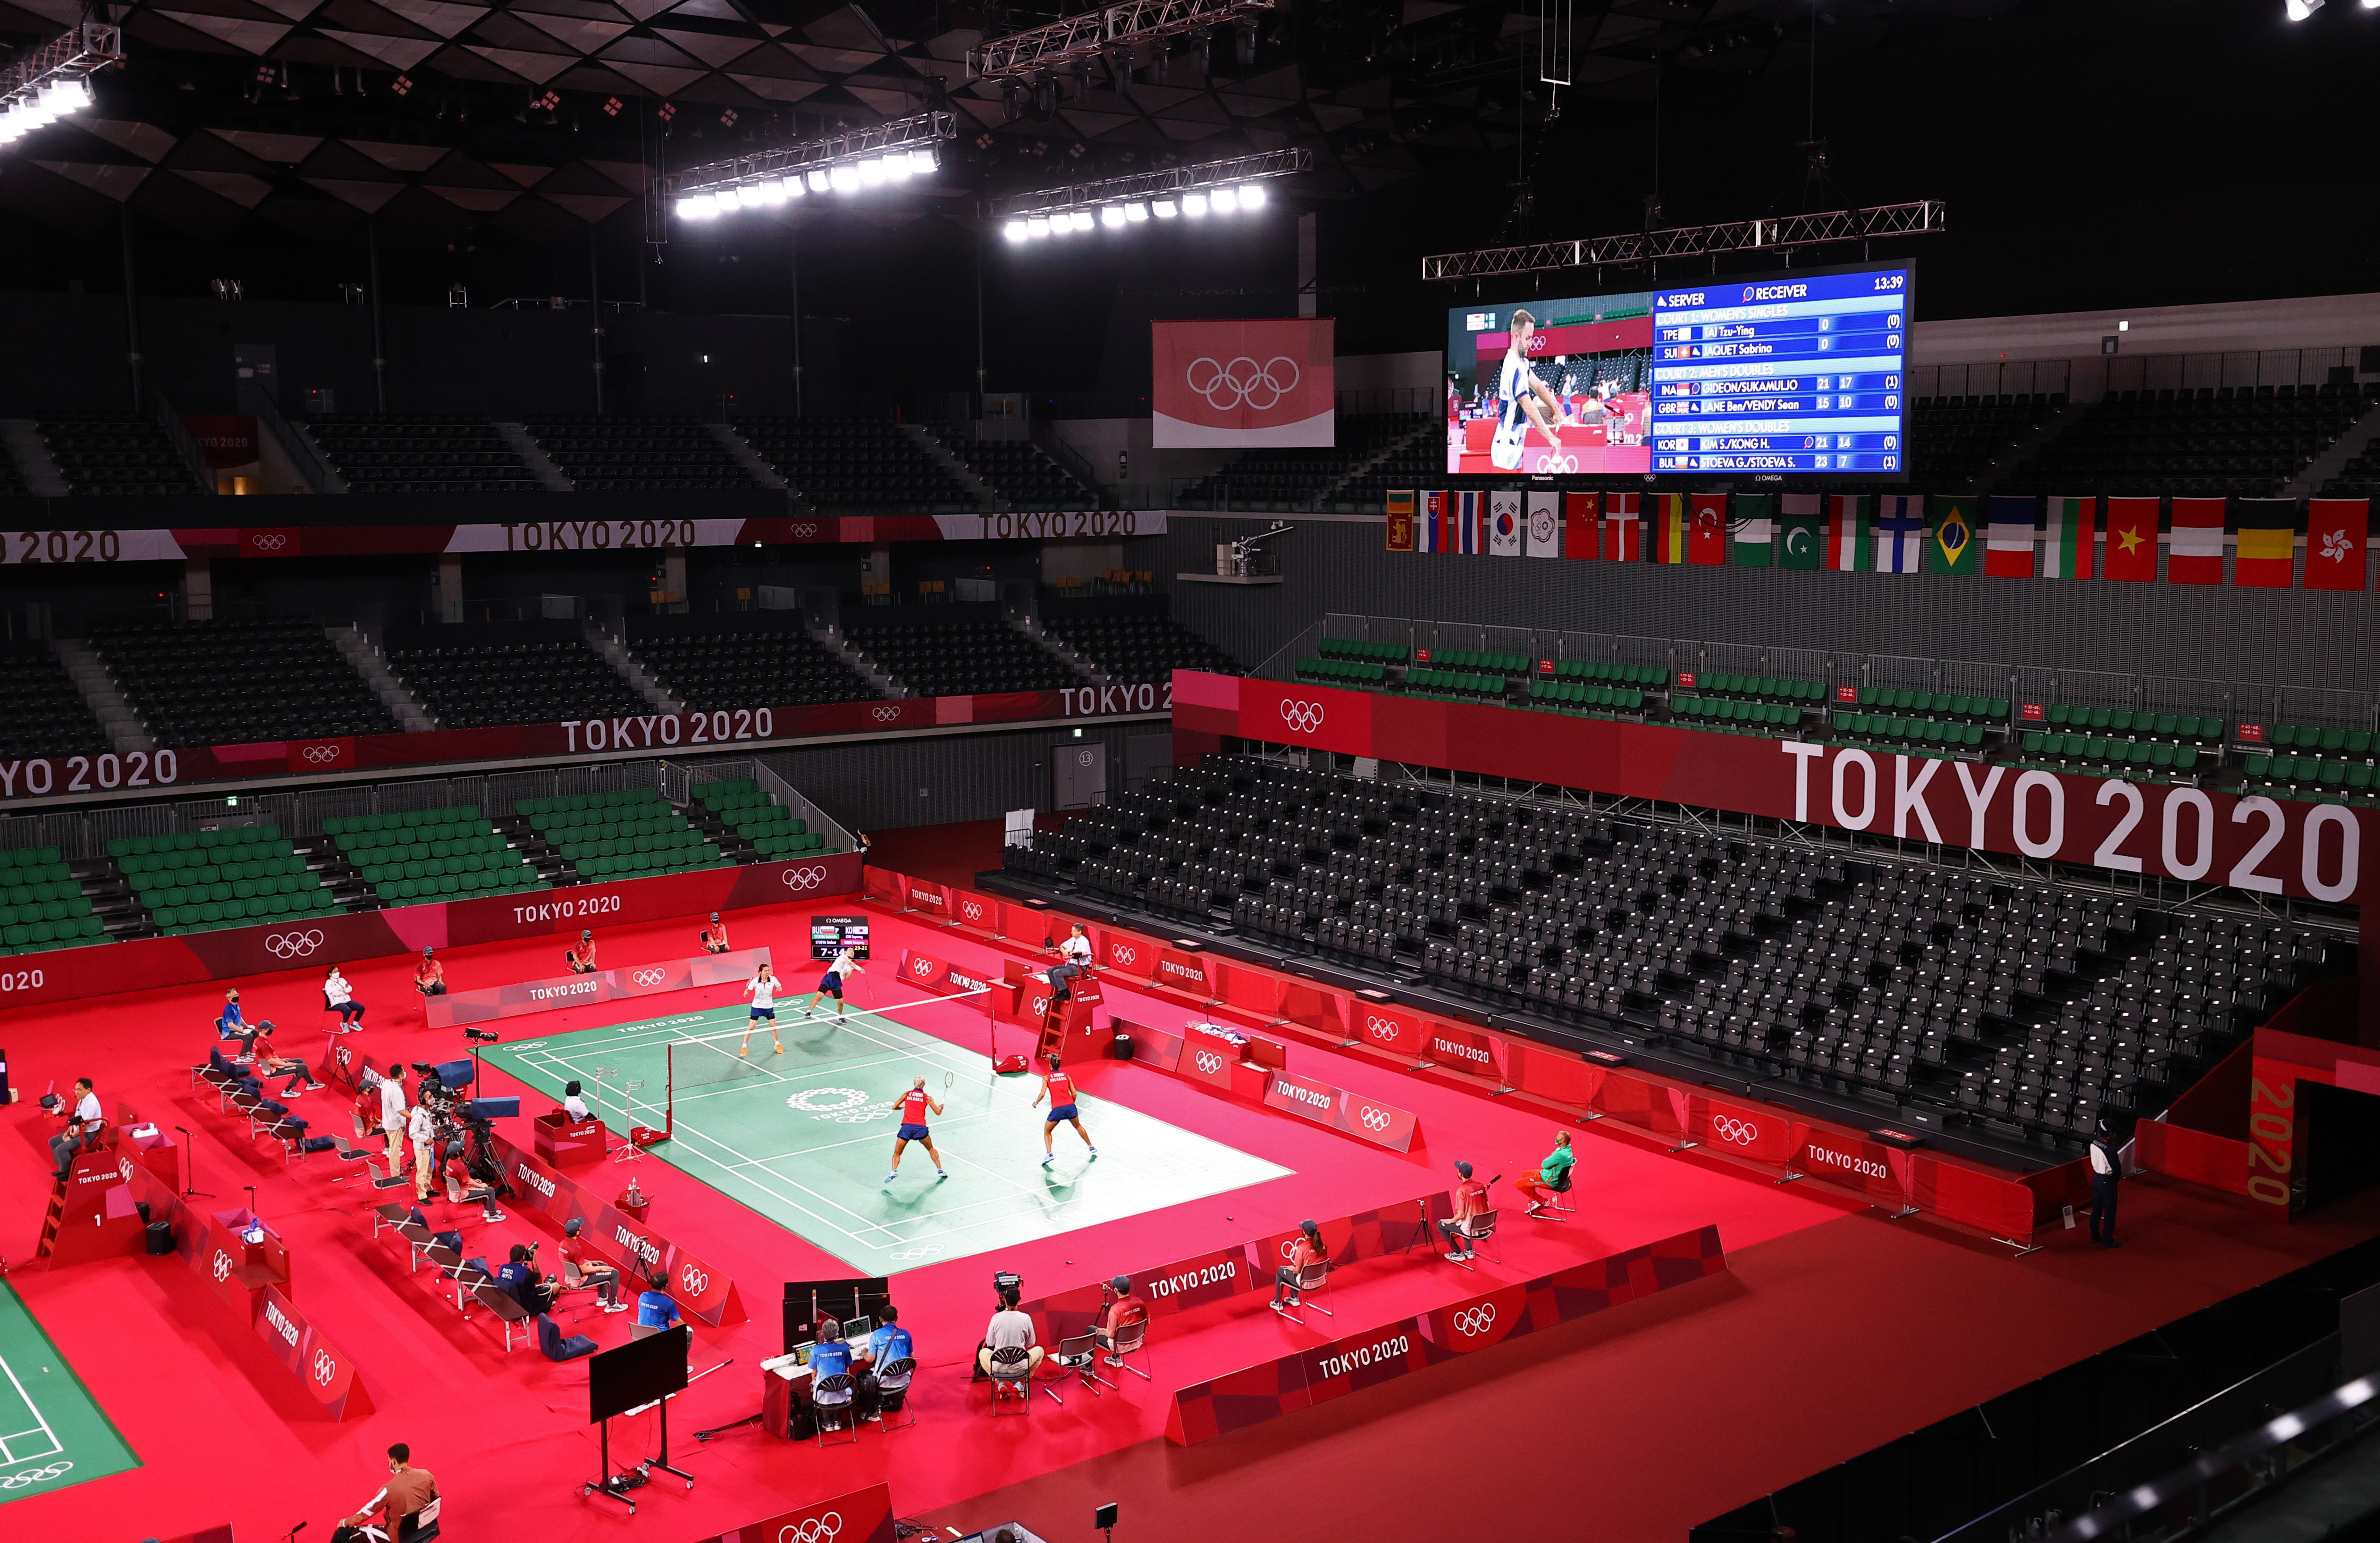 Tokyo 2020 Olympics - Badminton - Women's Doubles - Group Stage - MFS - Musashino Forest Sport Plaza, Tokyo, Japan - July 24, 2021. General view of the venue and empty seats seen during the match between Kim So-Yeong of South Korea and Kong Hee-Yong of South Korea, and Gabriela Stoeva of Bulgaria and Stefani Stoeva of Bulgaria. REUTERS/Leonhard Foeger